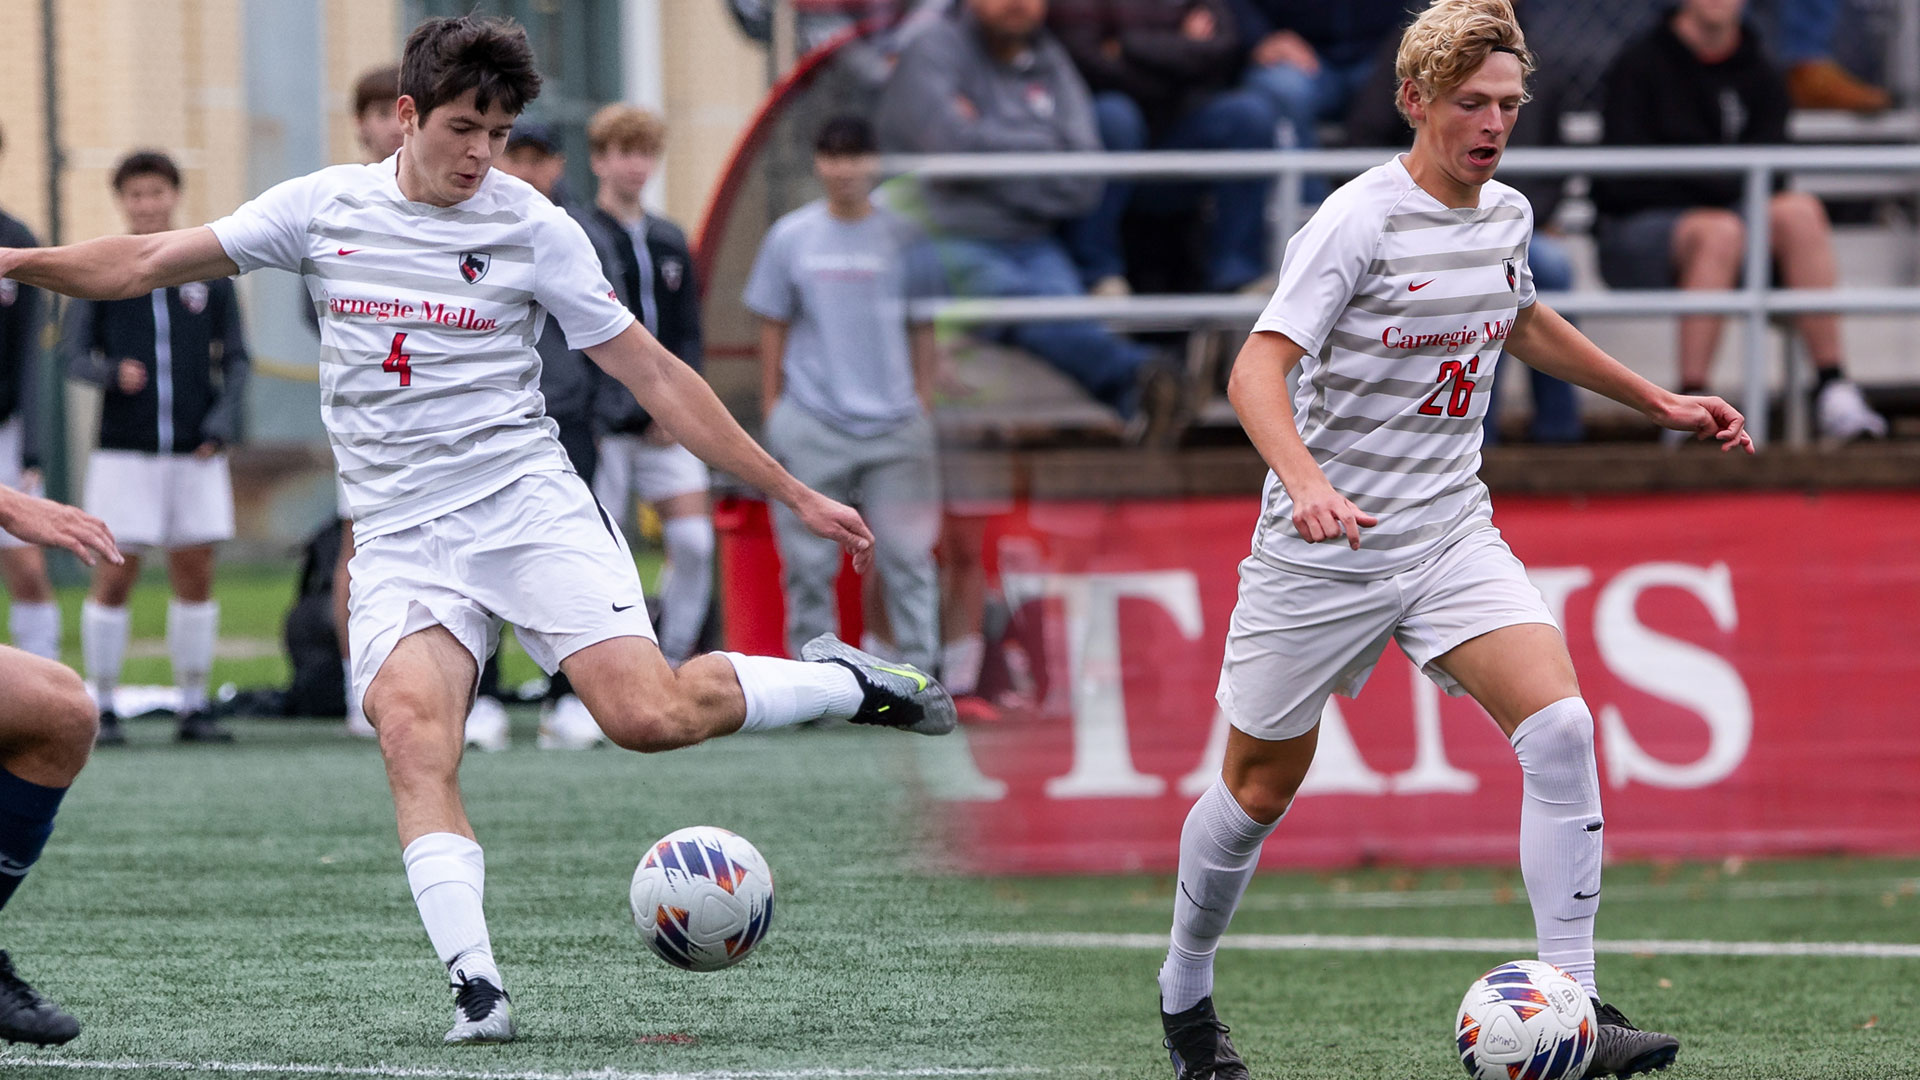 split image of two men's soccer players wearing white uniforms preparing to play the ball at their feet